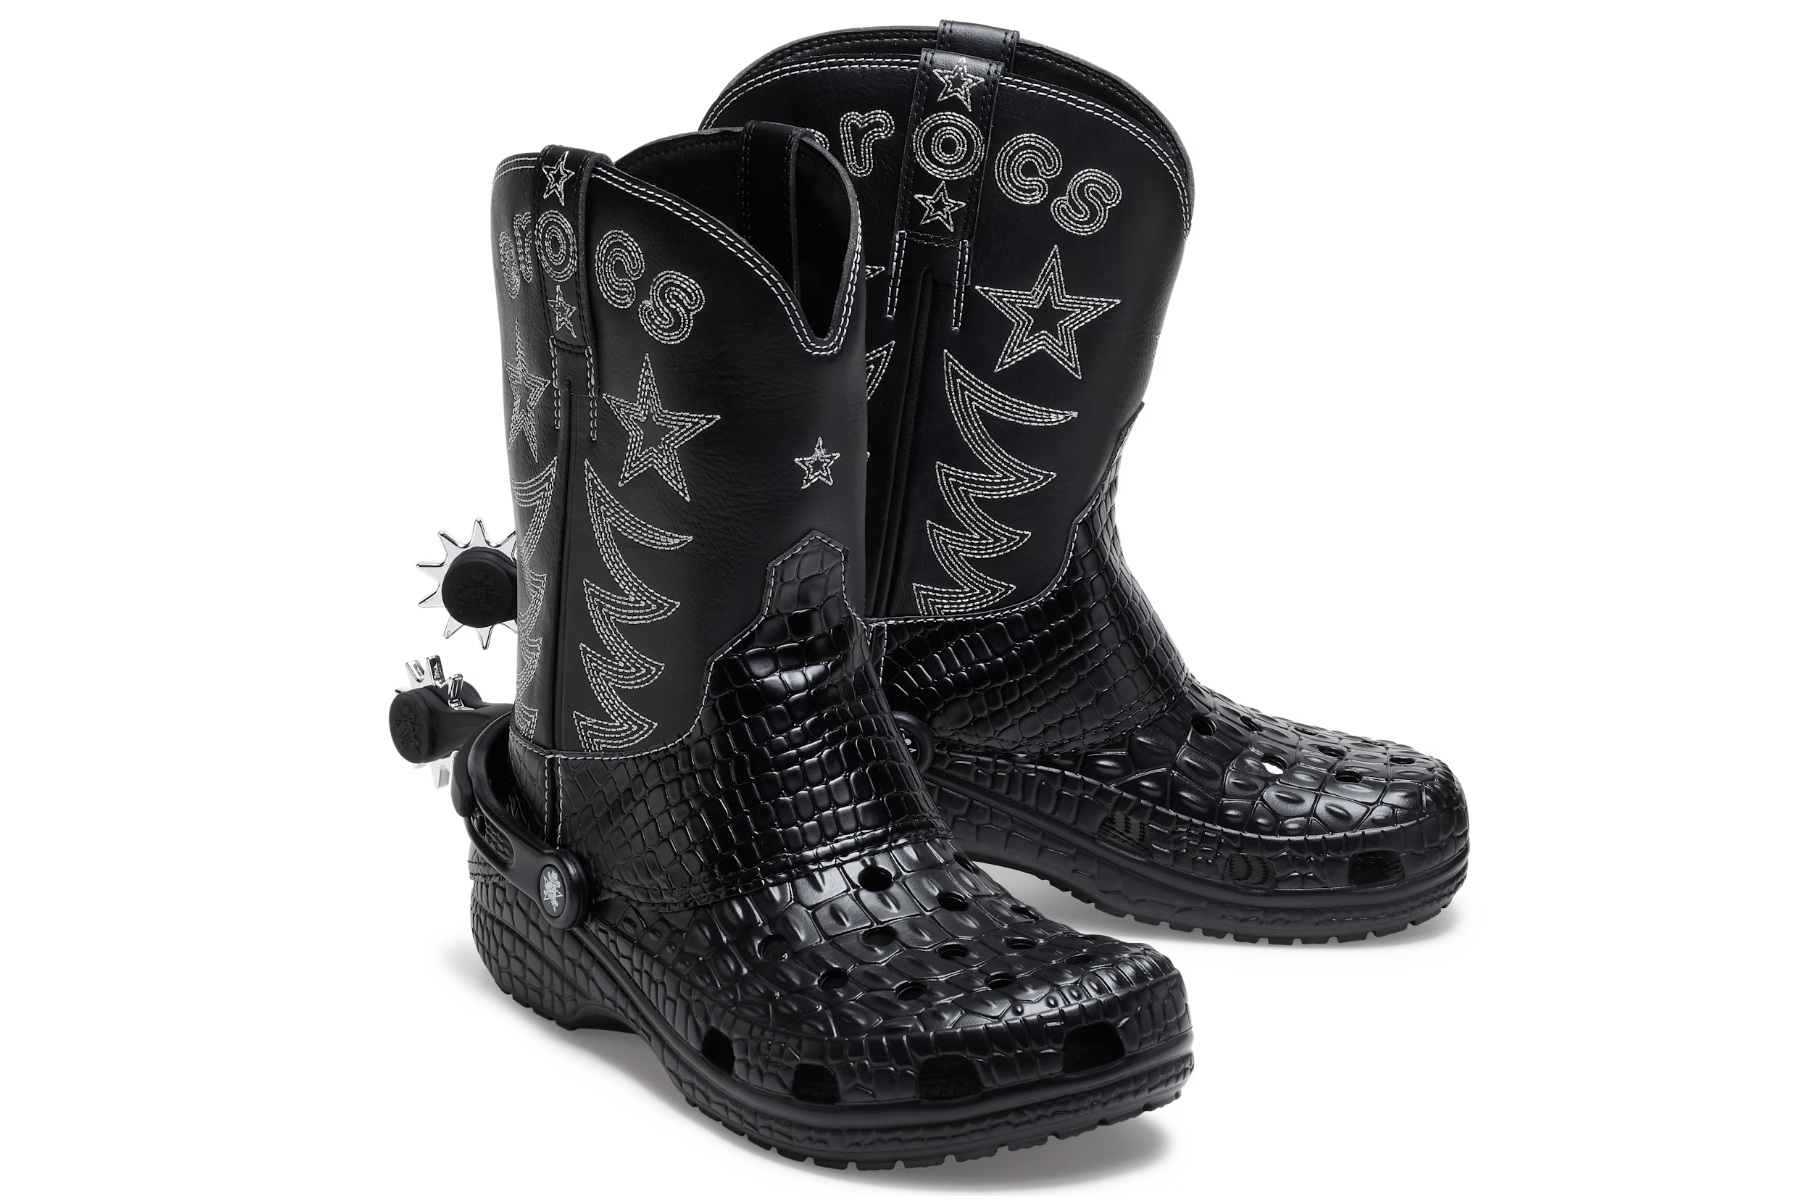 Crocs has released a pair of Classic Cowboy Boots for Fall/Winter 2023.